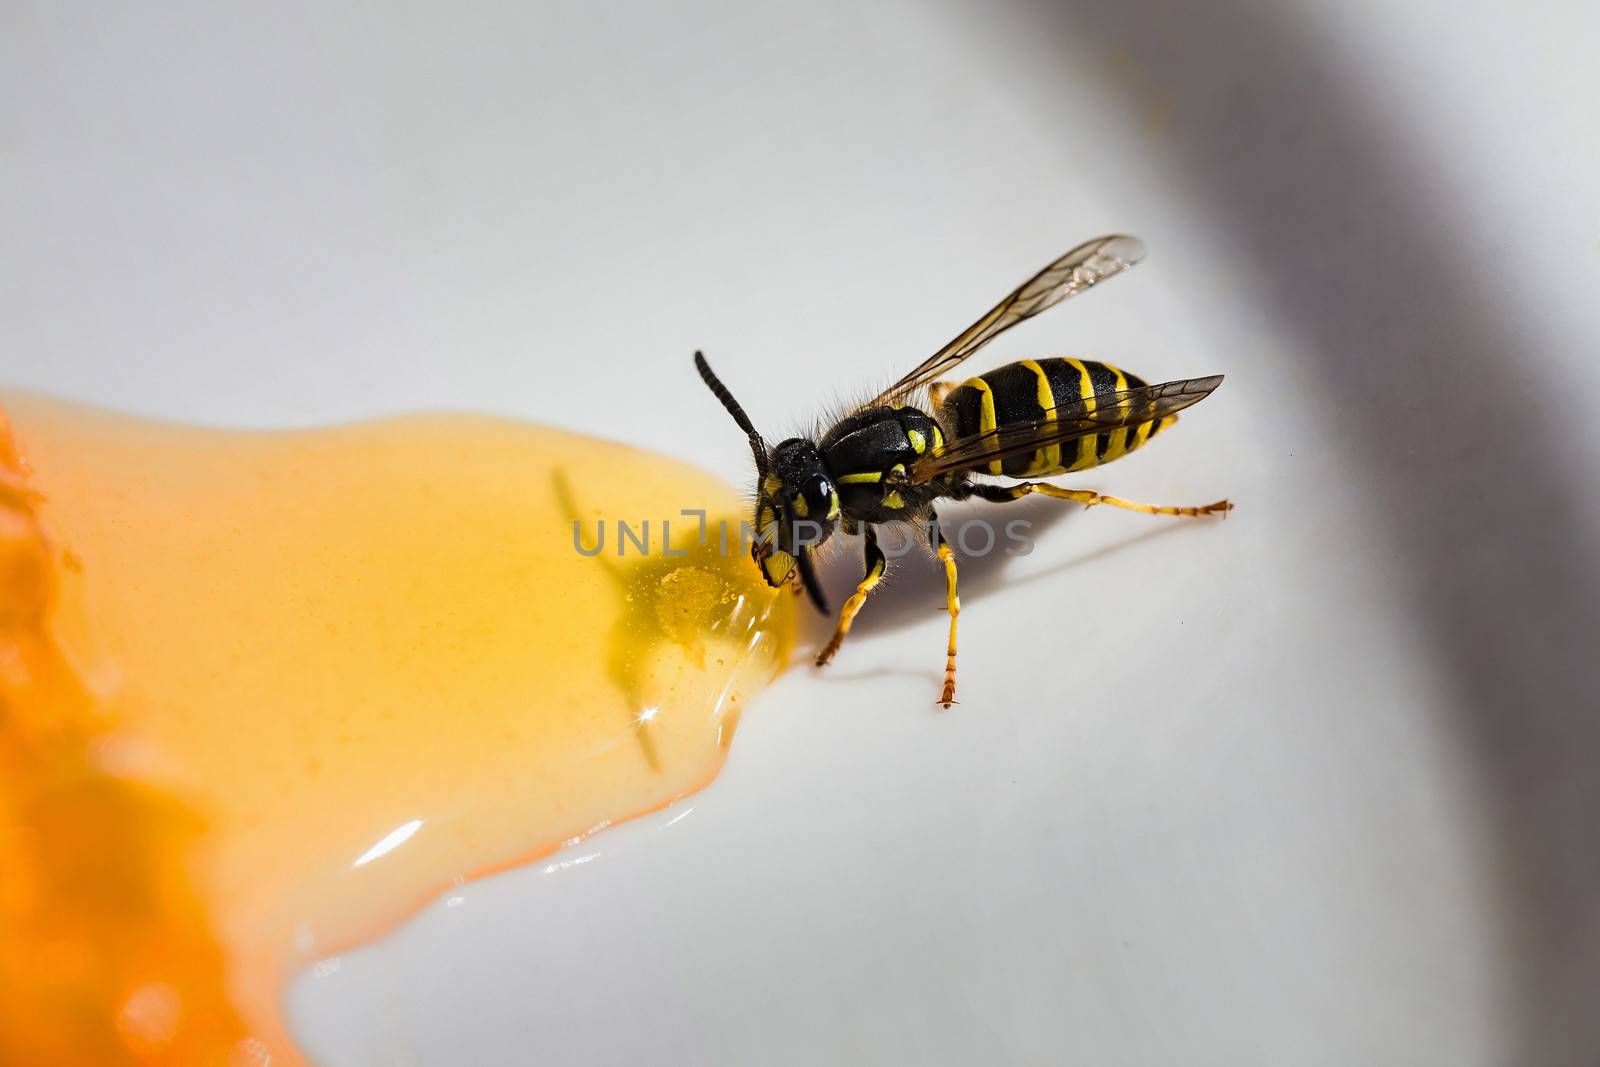 Wasp steals honey from the plate by oleg_zhukov